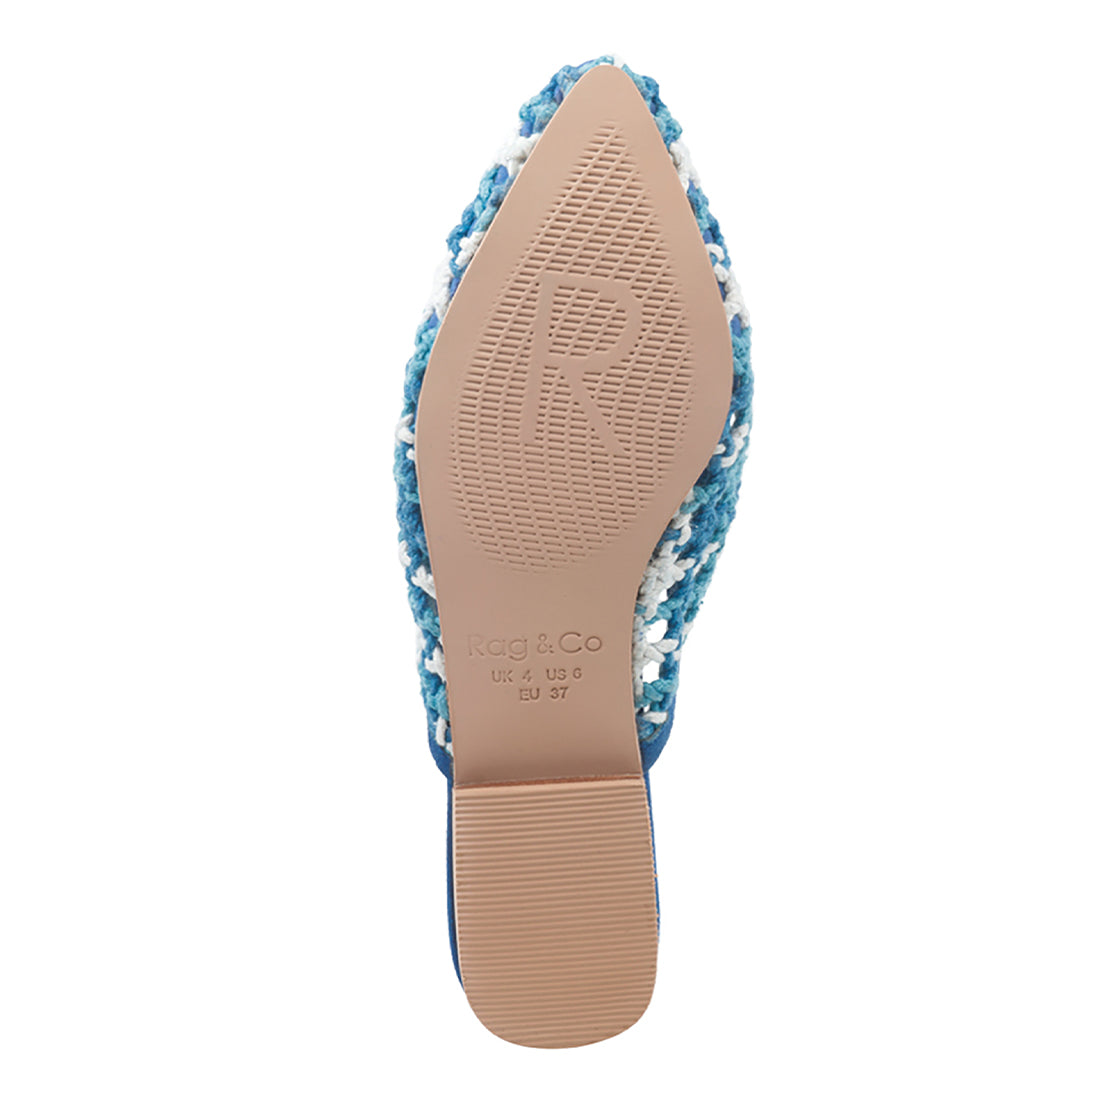 MARIANA Woven Flat Mules With Tassels